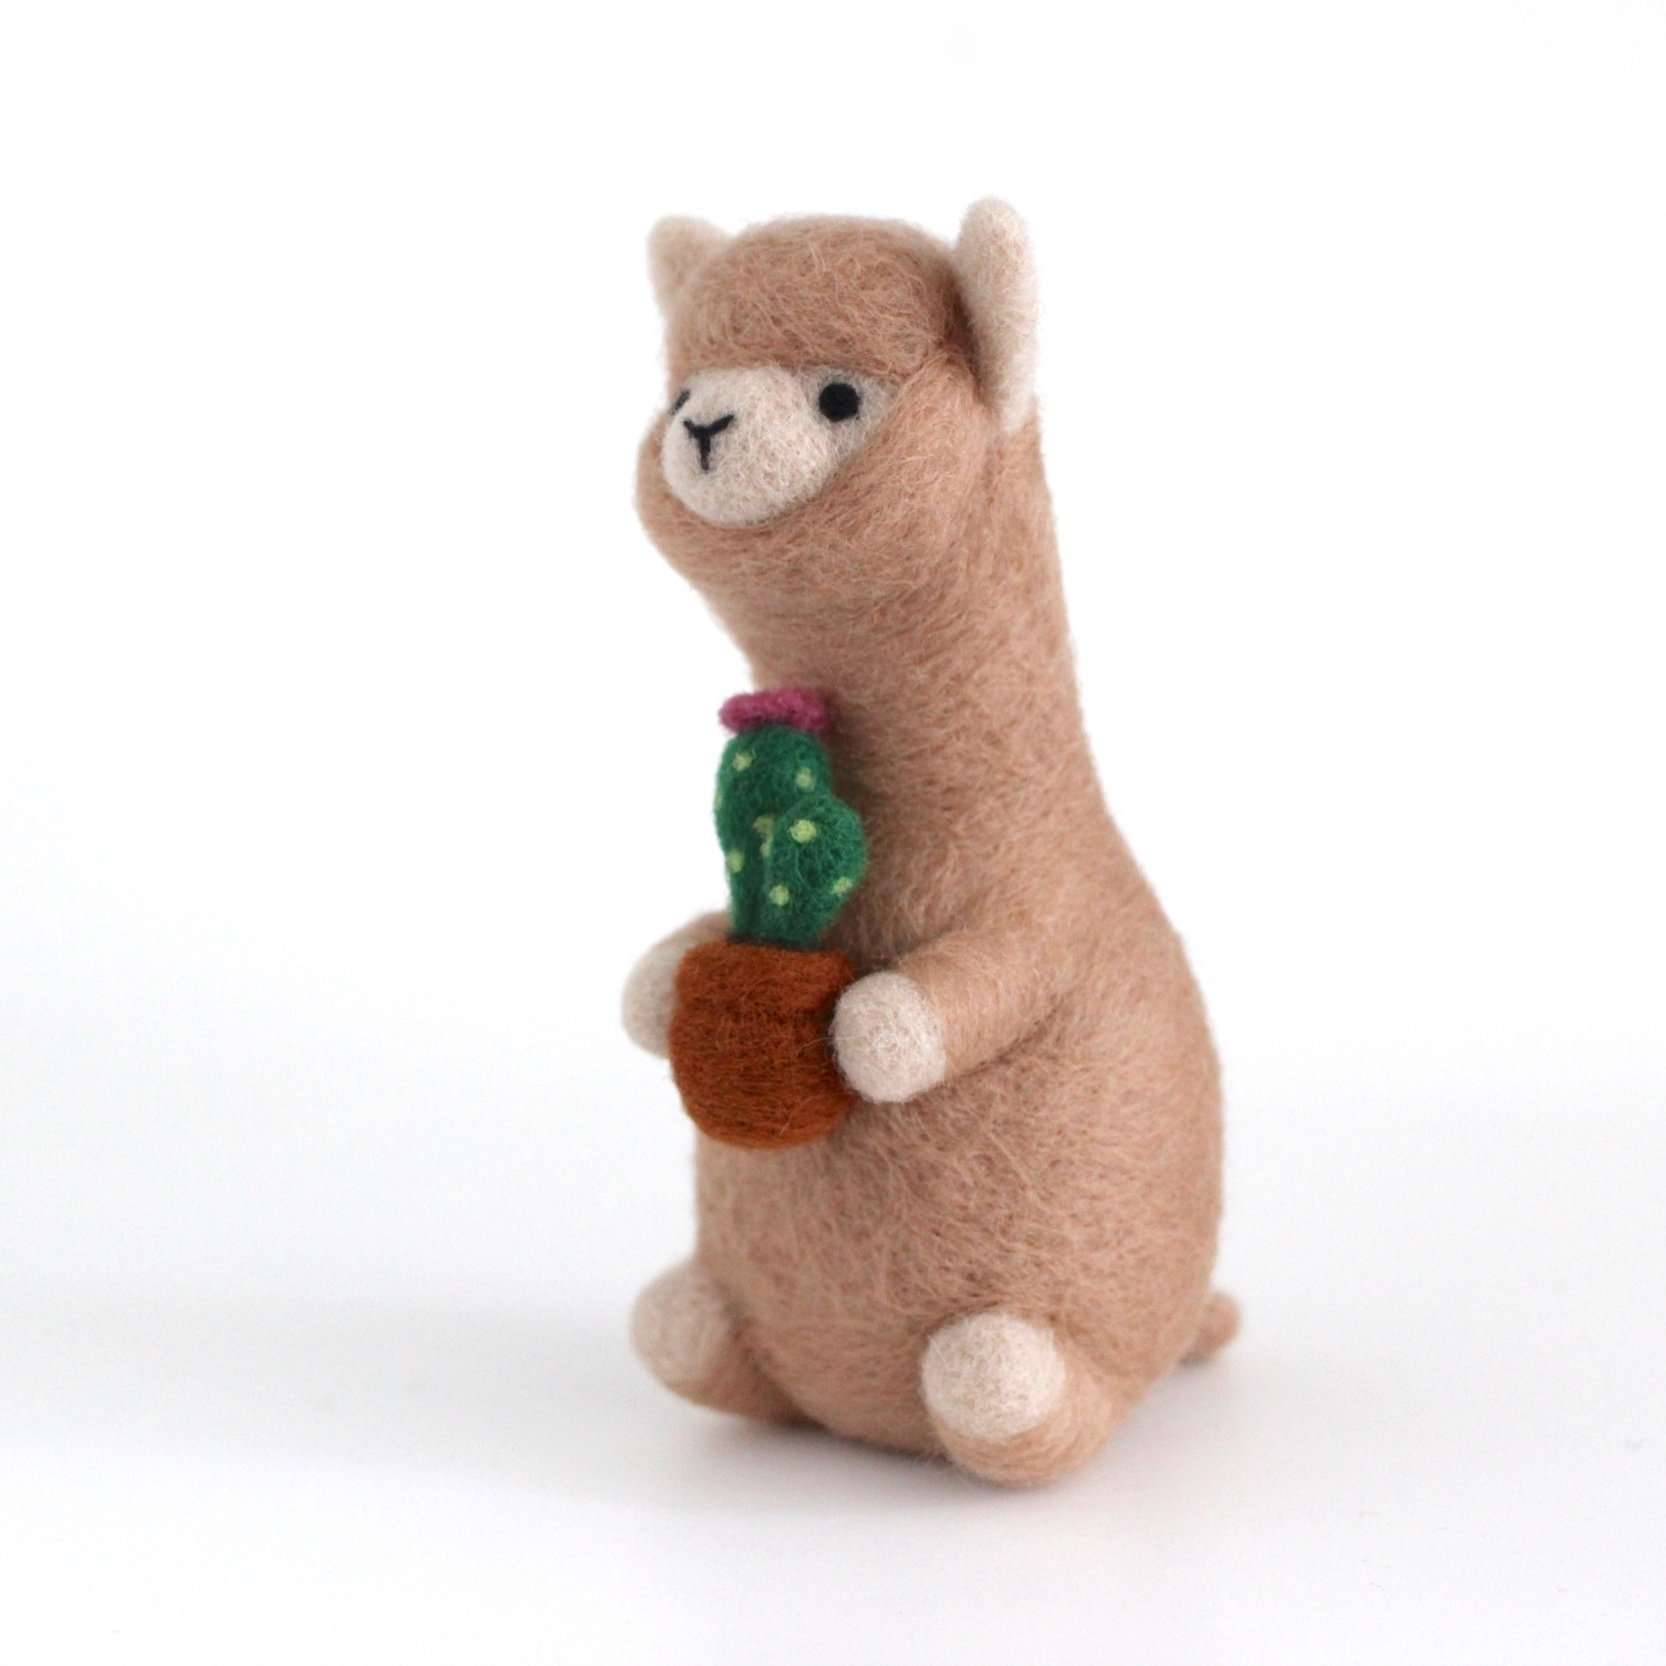 Needle Felted Alpaca holding Cactus by Wild Whimsy Woolies